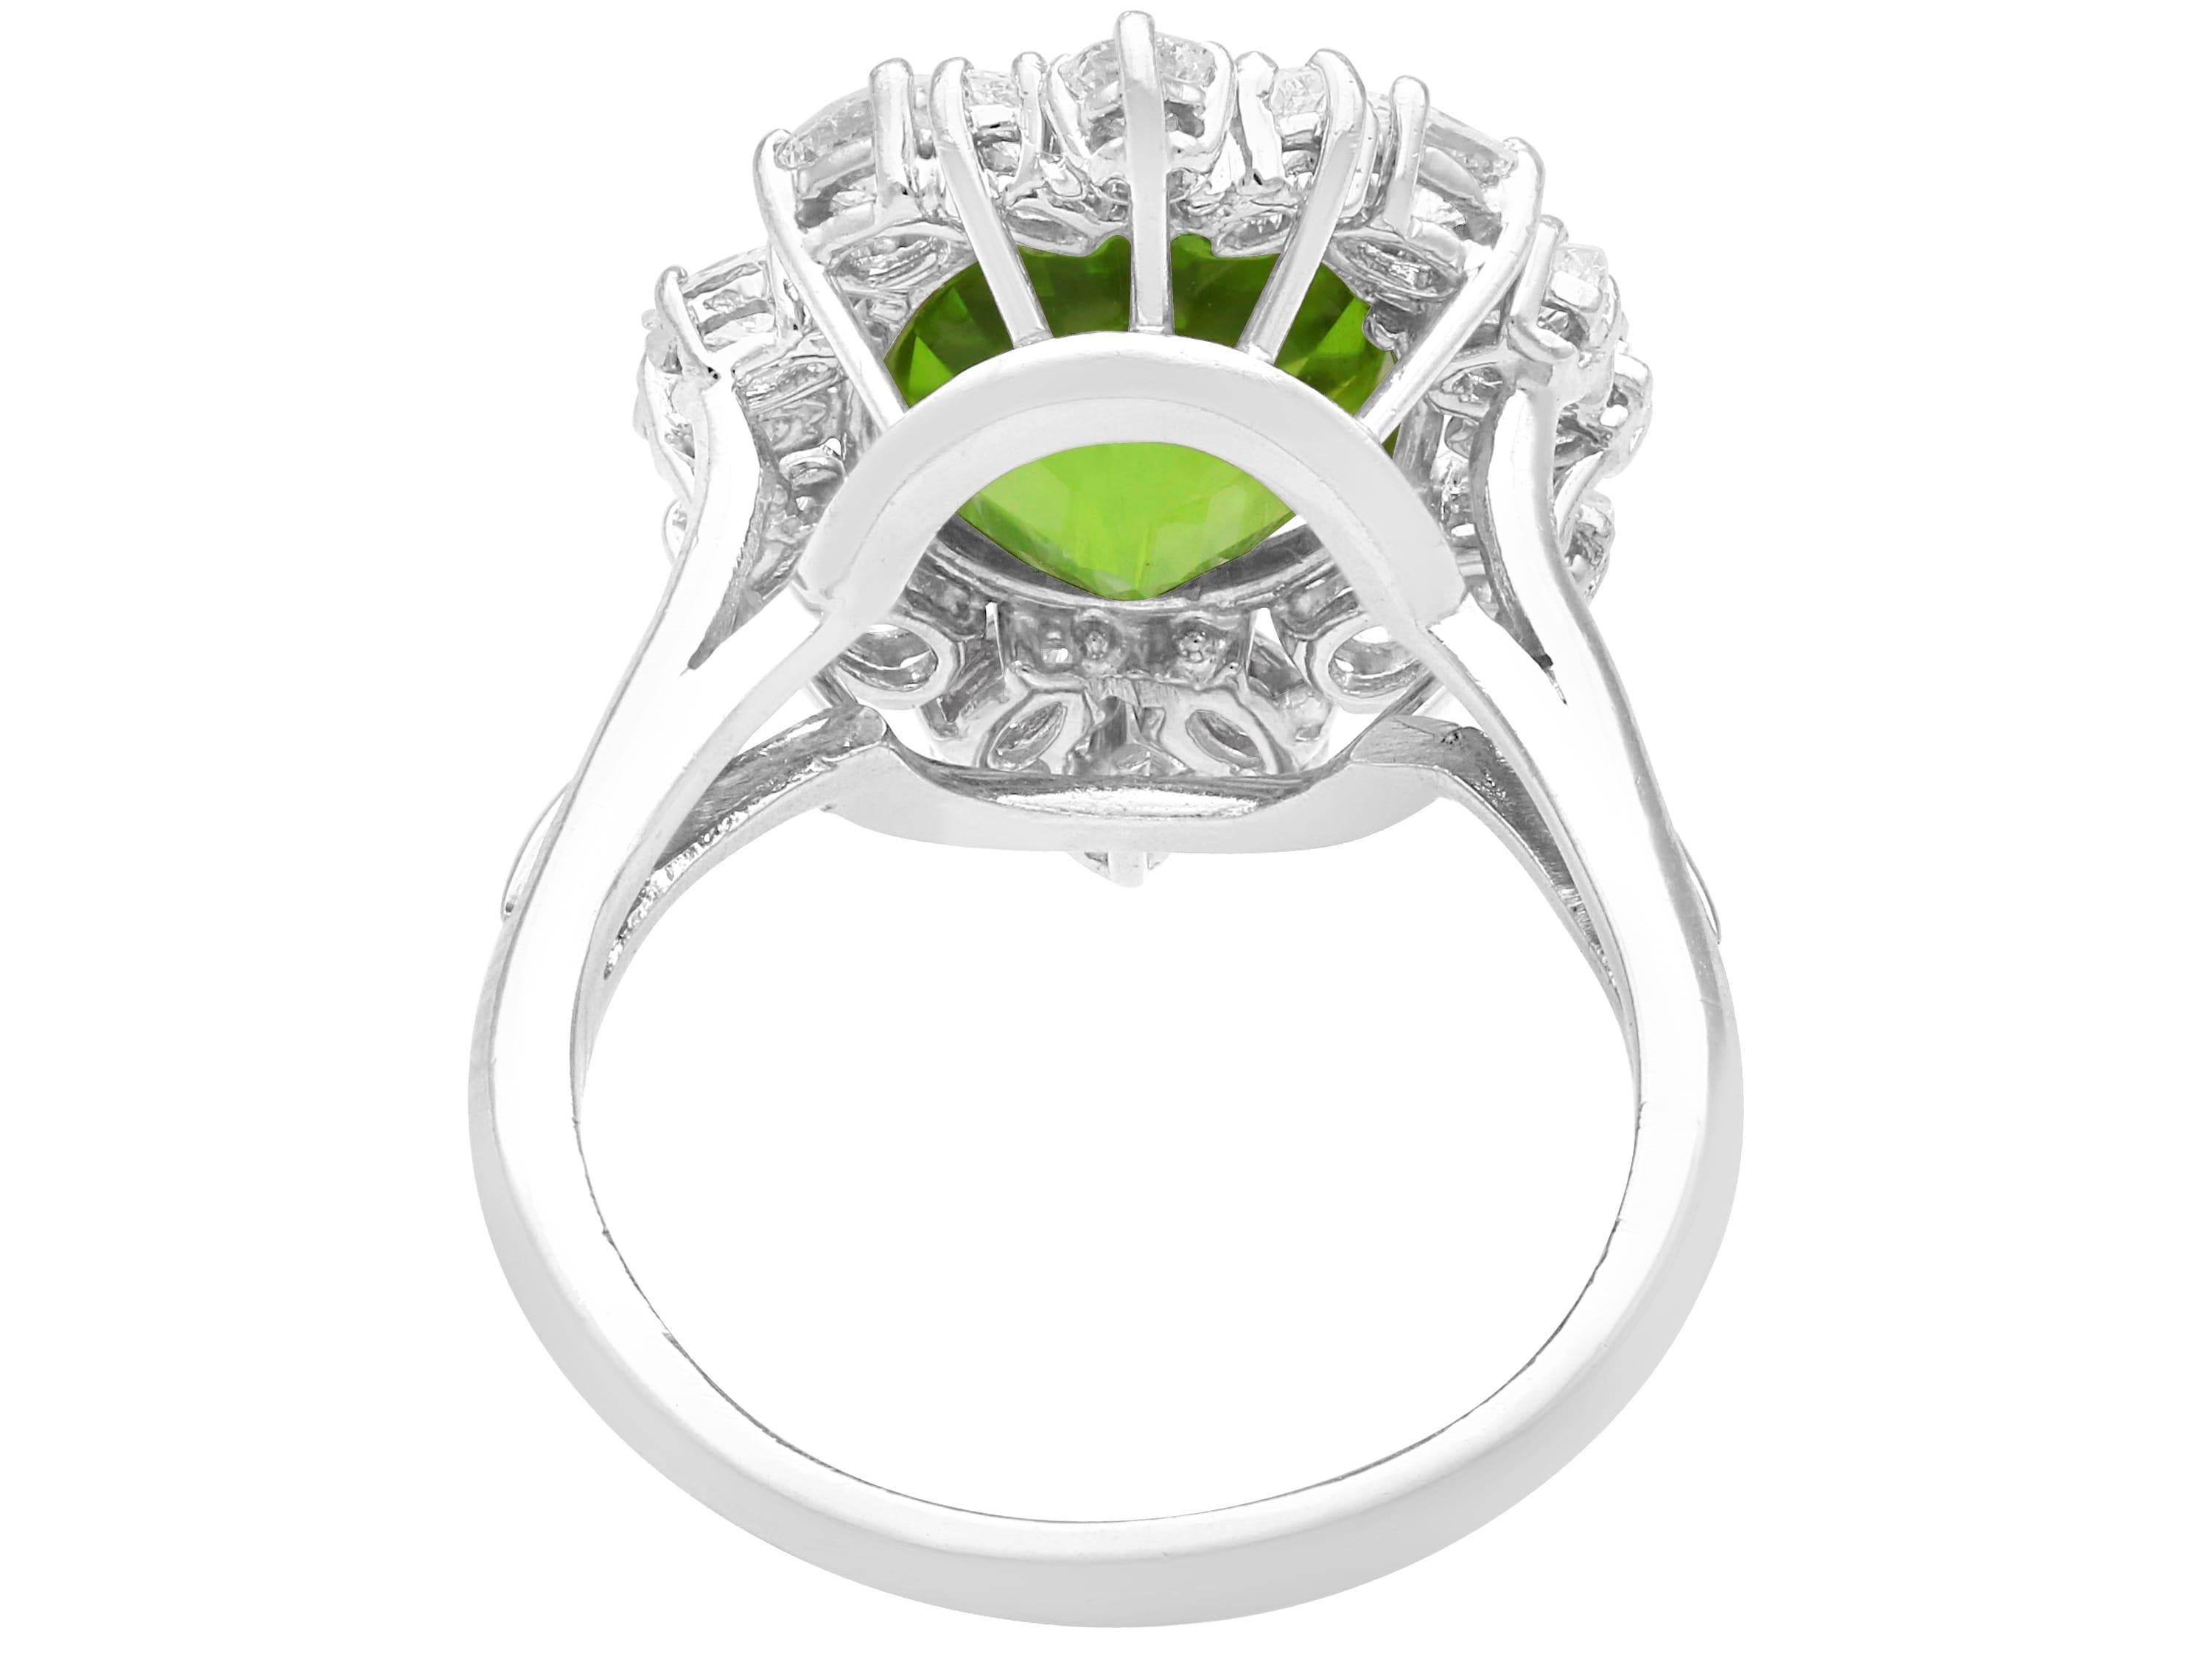 Vintage 1990s 7.20ct Peridot and 2.35ct Diamond, Platinum Dress Ring In Excellent Condition For Sale In Jesmond, Newcastle Upon Tyne